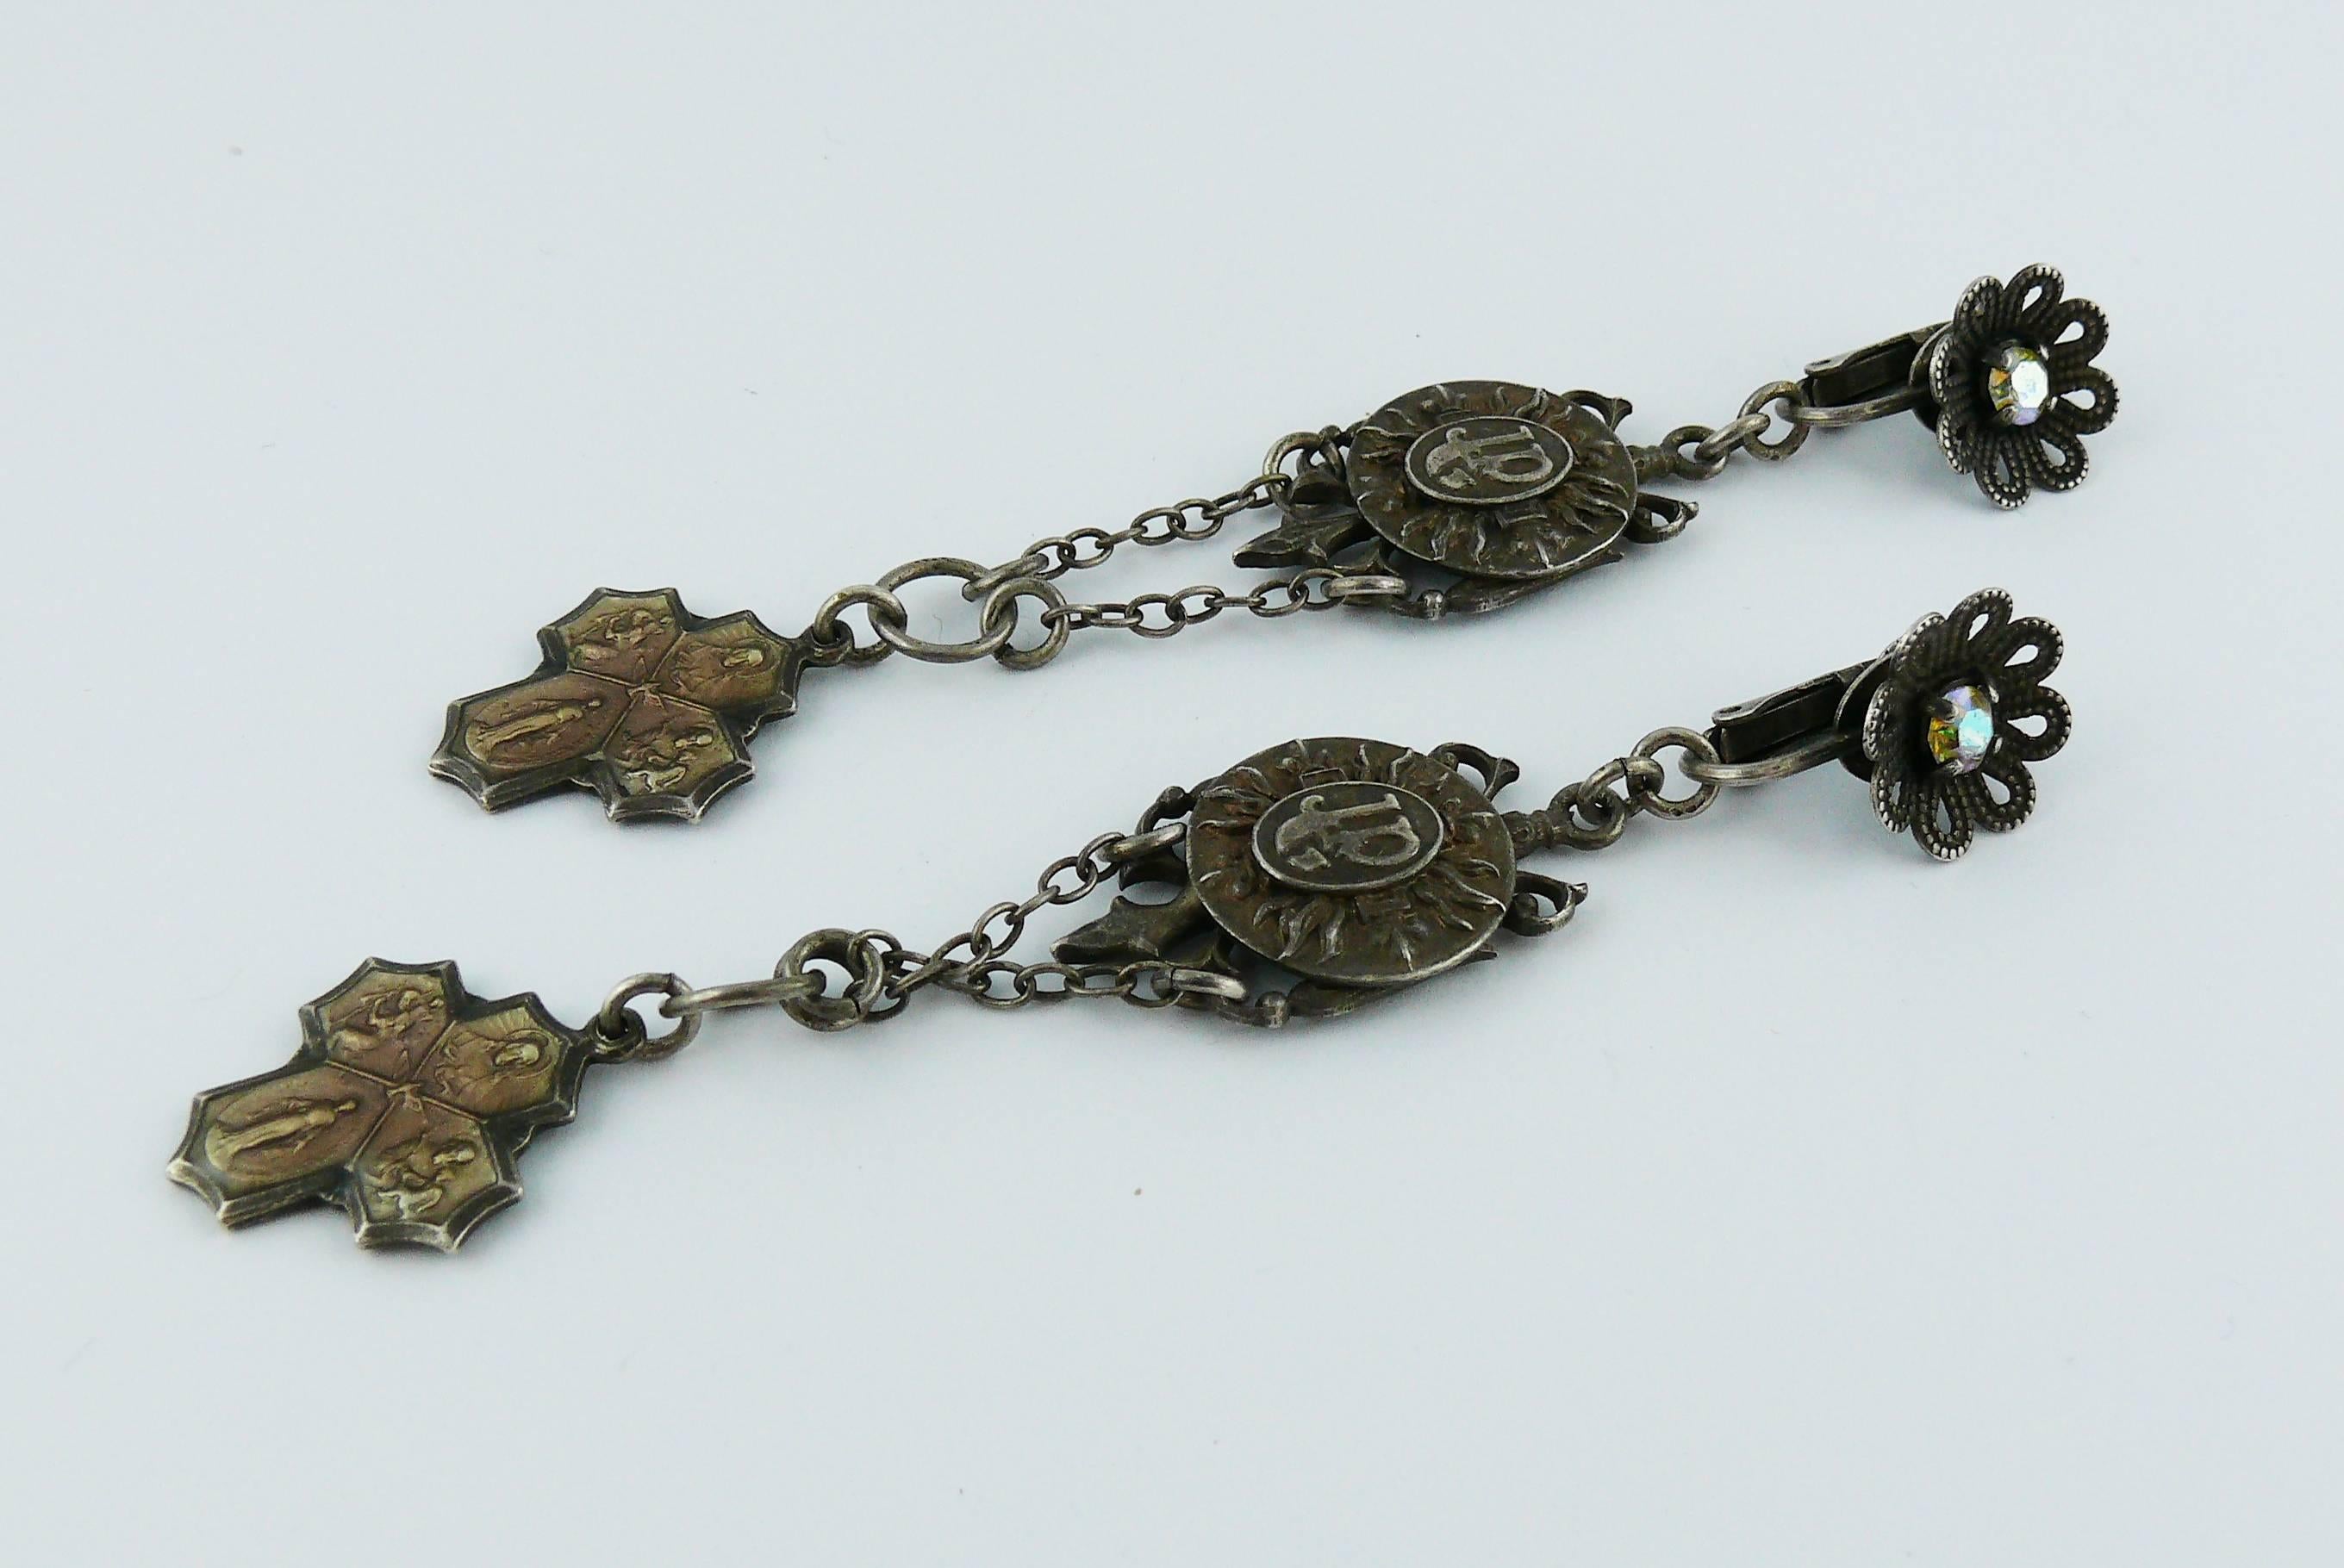 JEAN PAUL GAULTIER vintage gun patina dangling earrings (clip on) featuring a scapular charm with Jesus and religious figures.

Marked JPG.

Indicative measurements : length approx. 10 cm (3.94 inches) / max. width approx. 1.7 cm (0.67